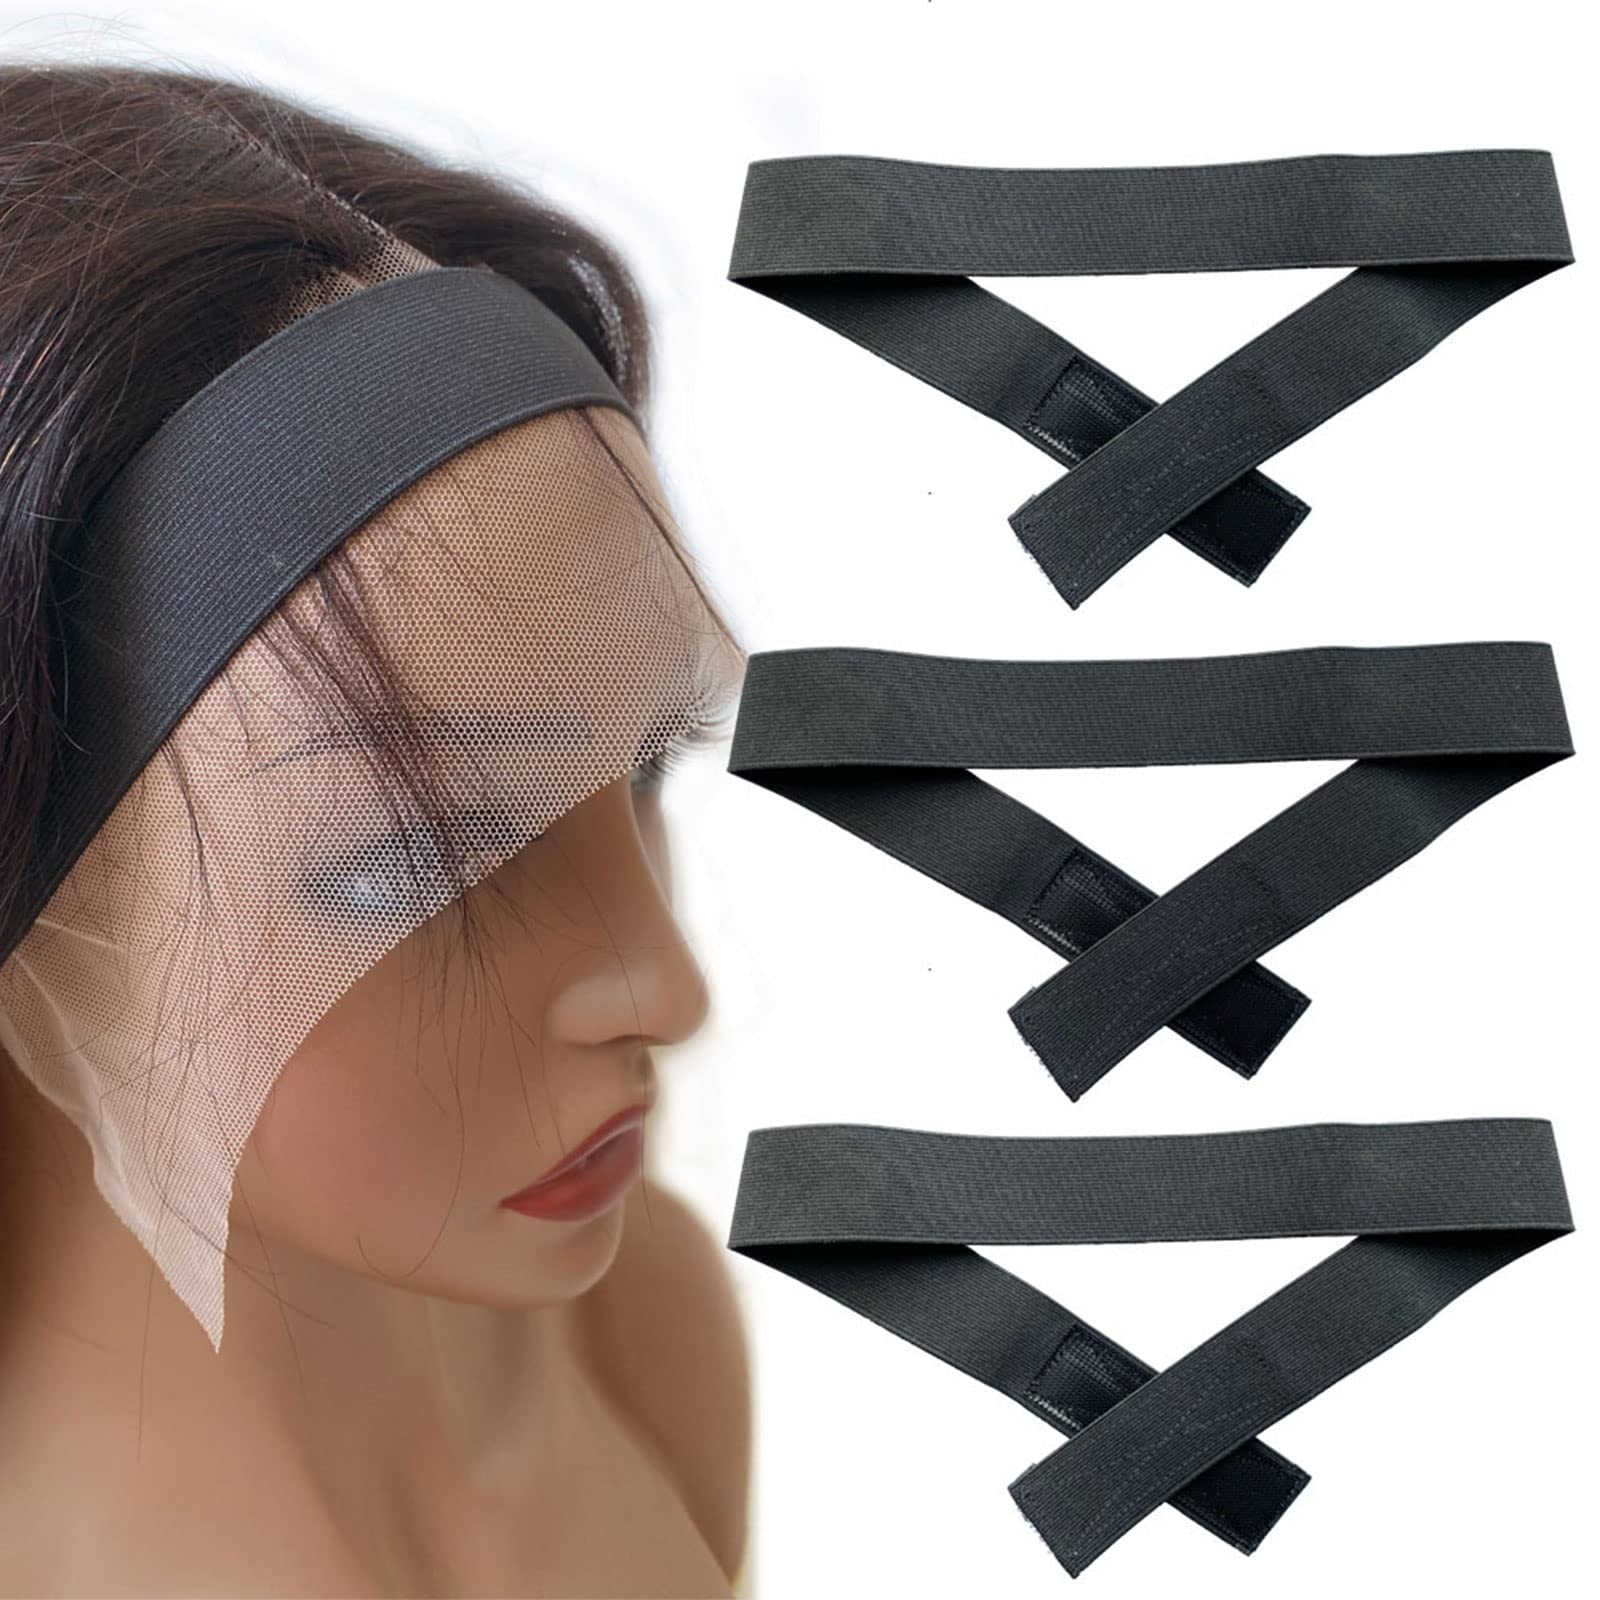 Elastic Band For Wigs Adjustable Sewing Band For Making Wigs Lace Closure  And Lace Frontal 3.5 Cm Width Adjustable Elastic Band From Rebeautyhair,  $91.65